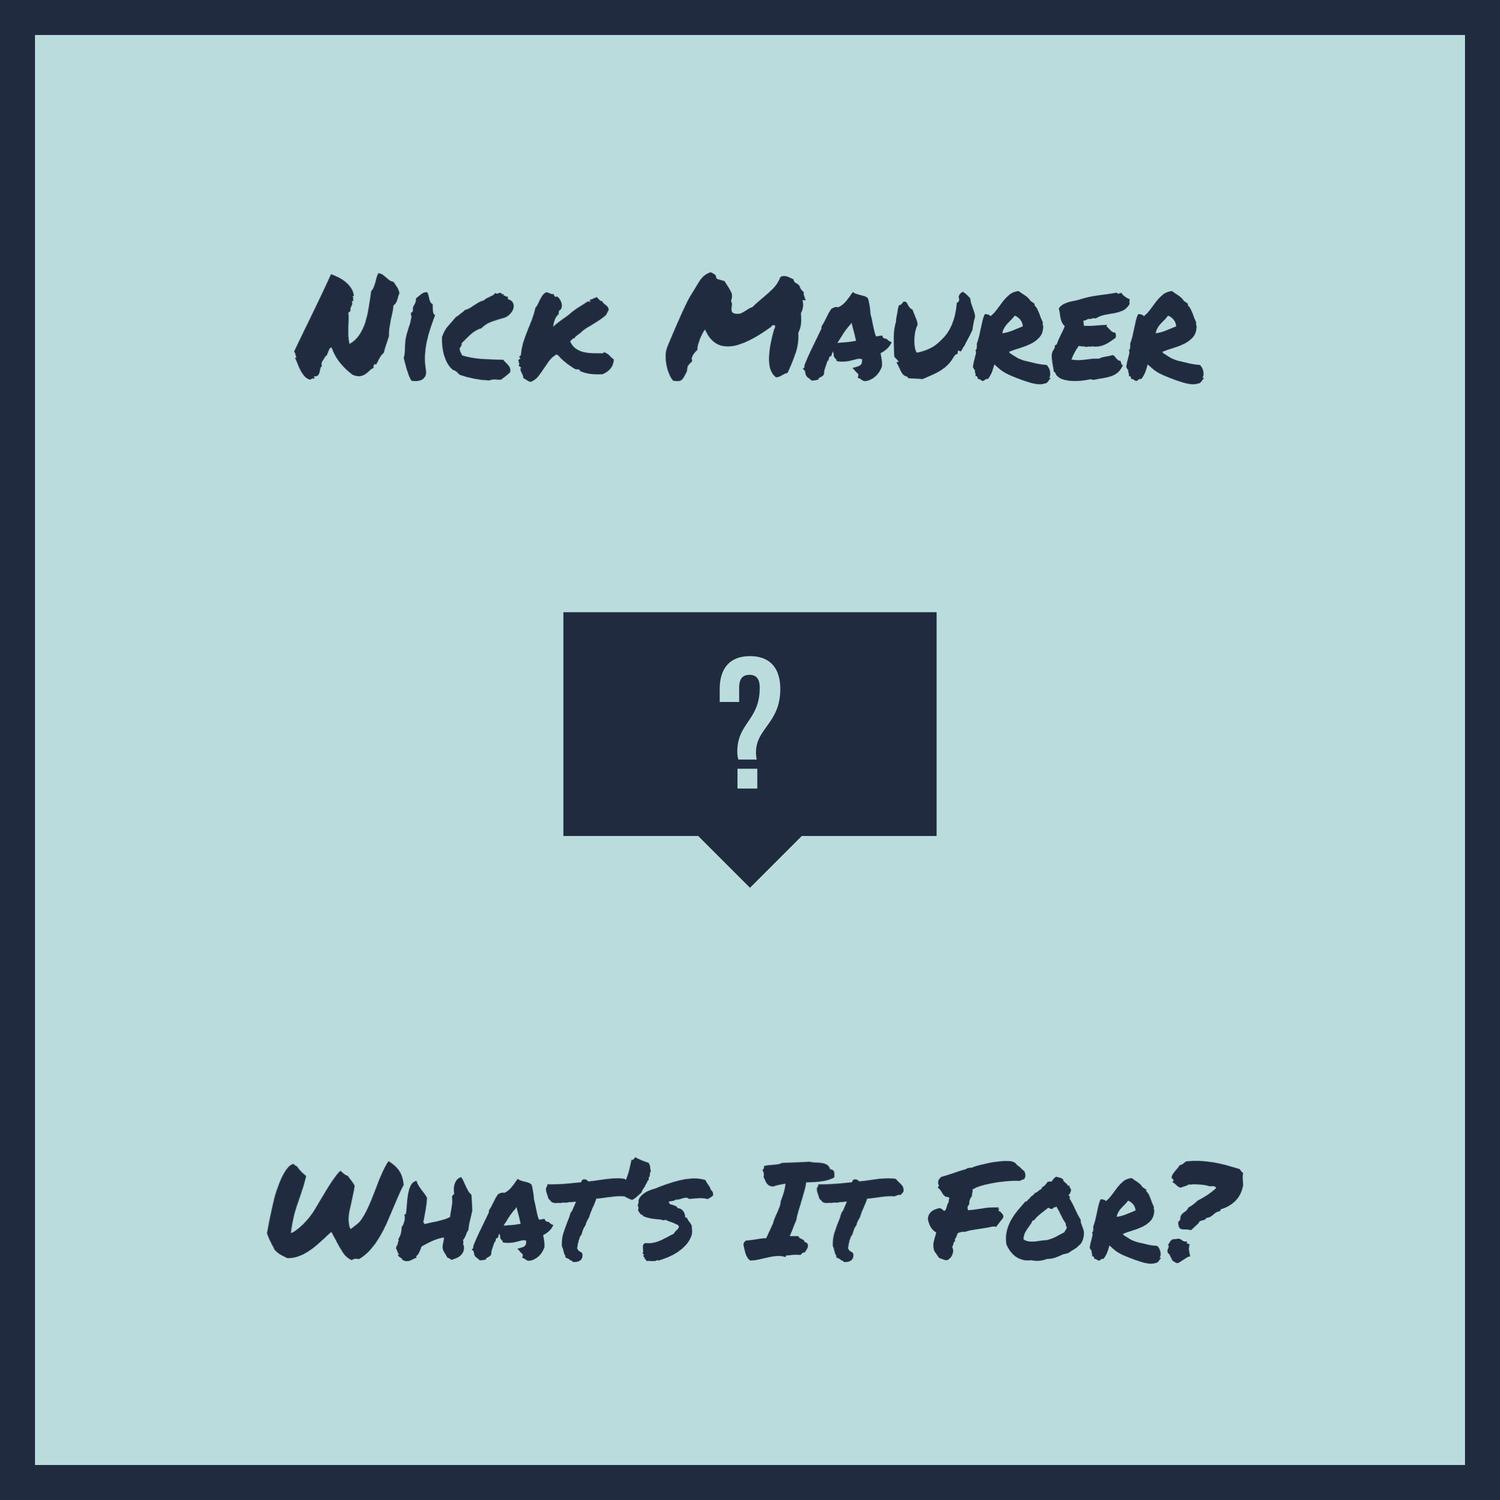 Nick Maurer - What's It for?